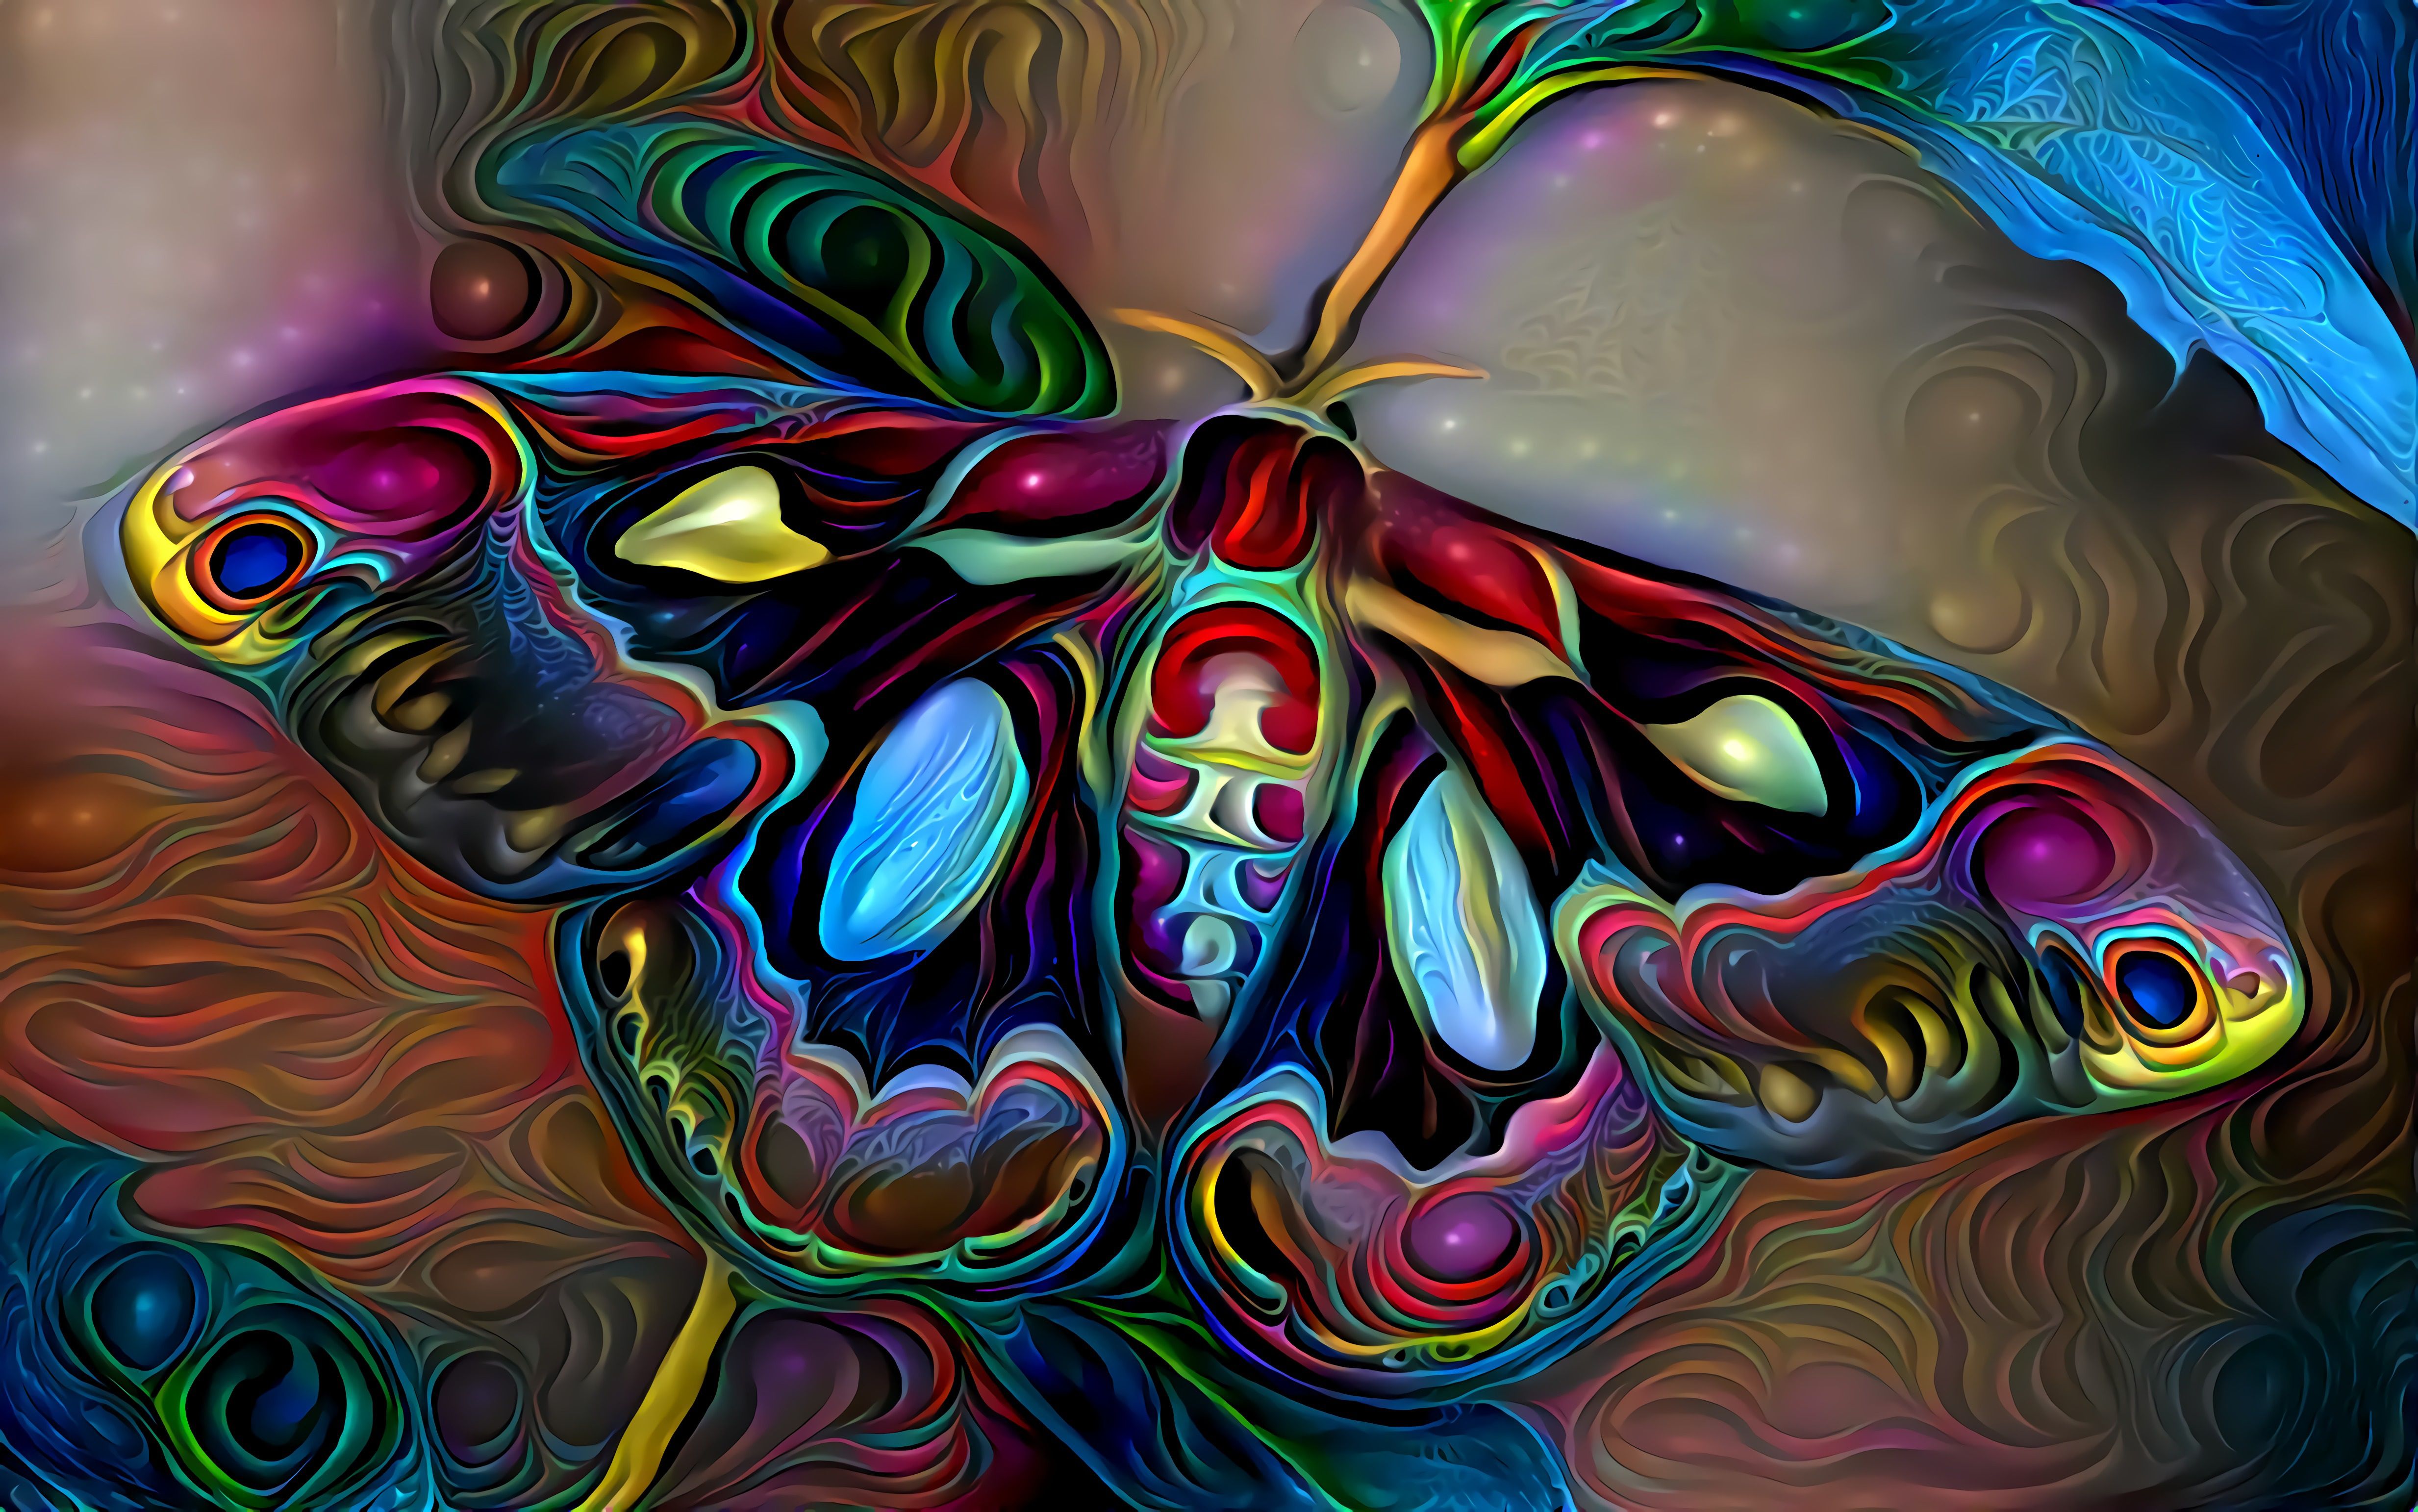 Colorful Artistic Butterfly or Moth 4k Ultra HD Wallpaper